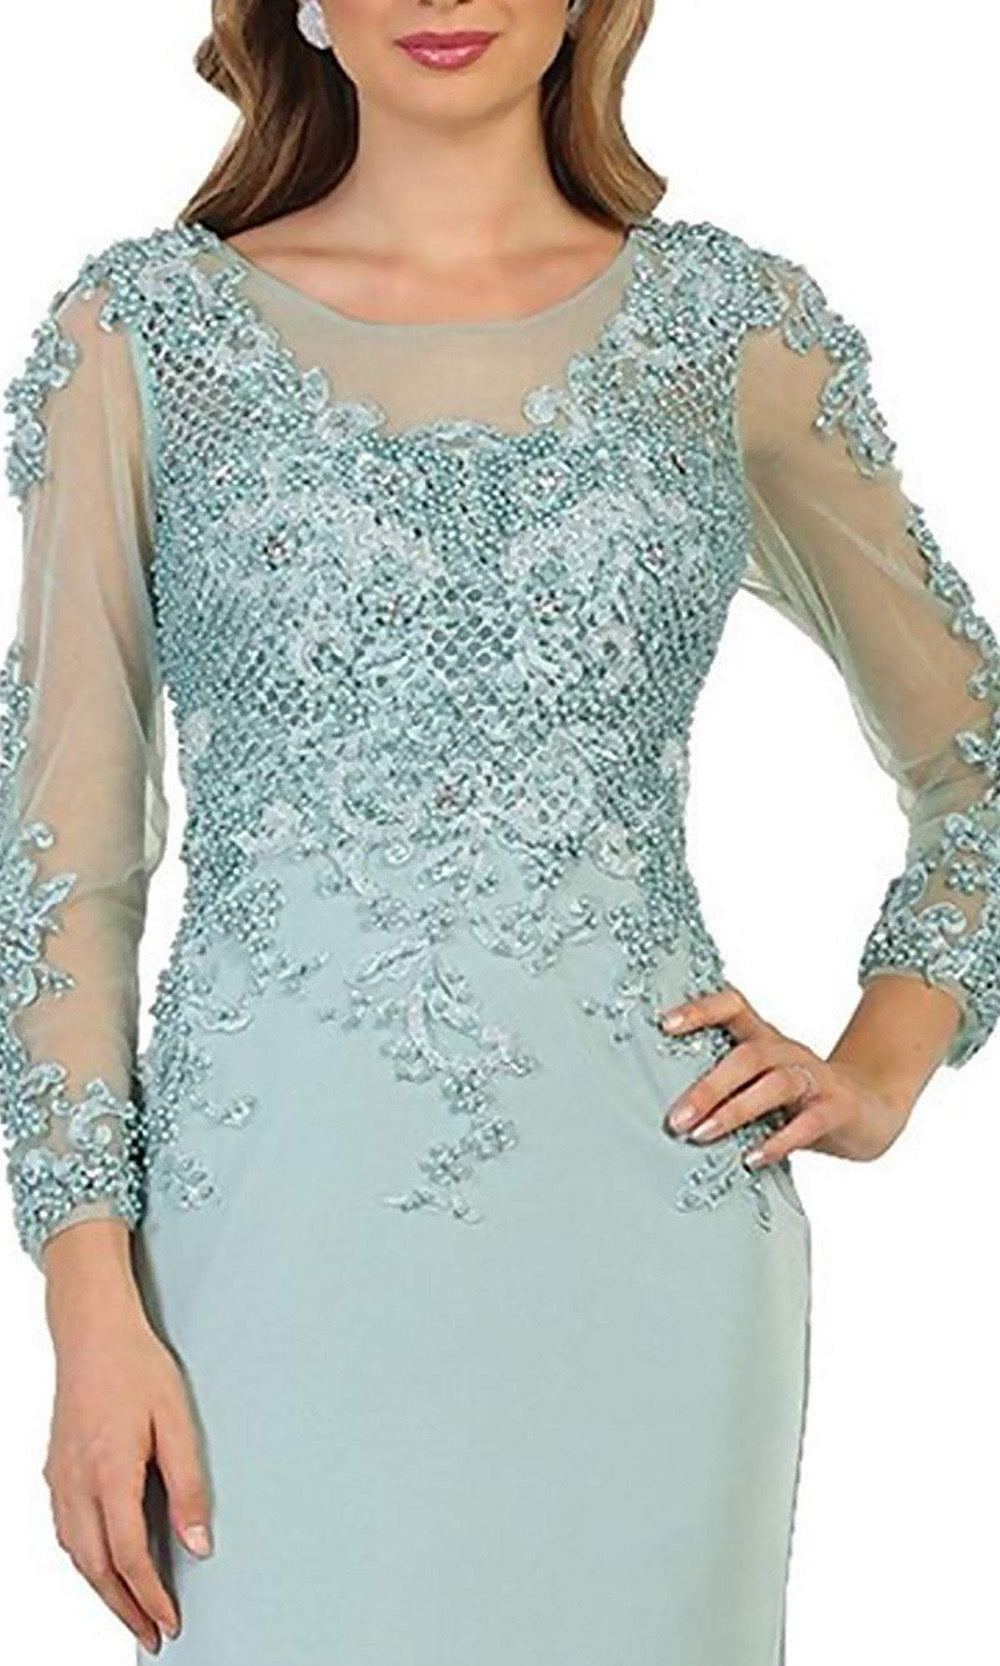 May Queen - Embellished Long Sleeve Illusion Scoop Sheath Mother of the Bride Gown RQ7594 - 1 pc Sage In Size M Available CCSALE M / Sage